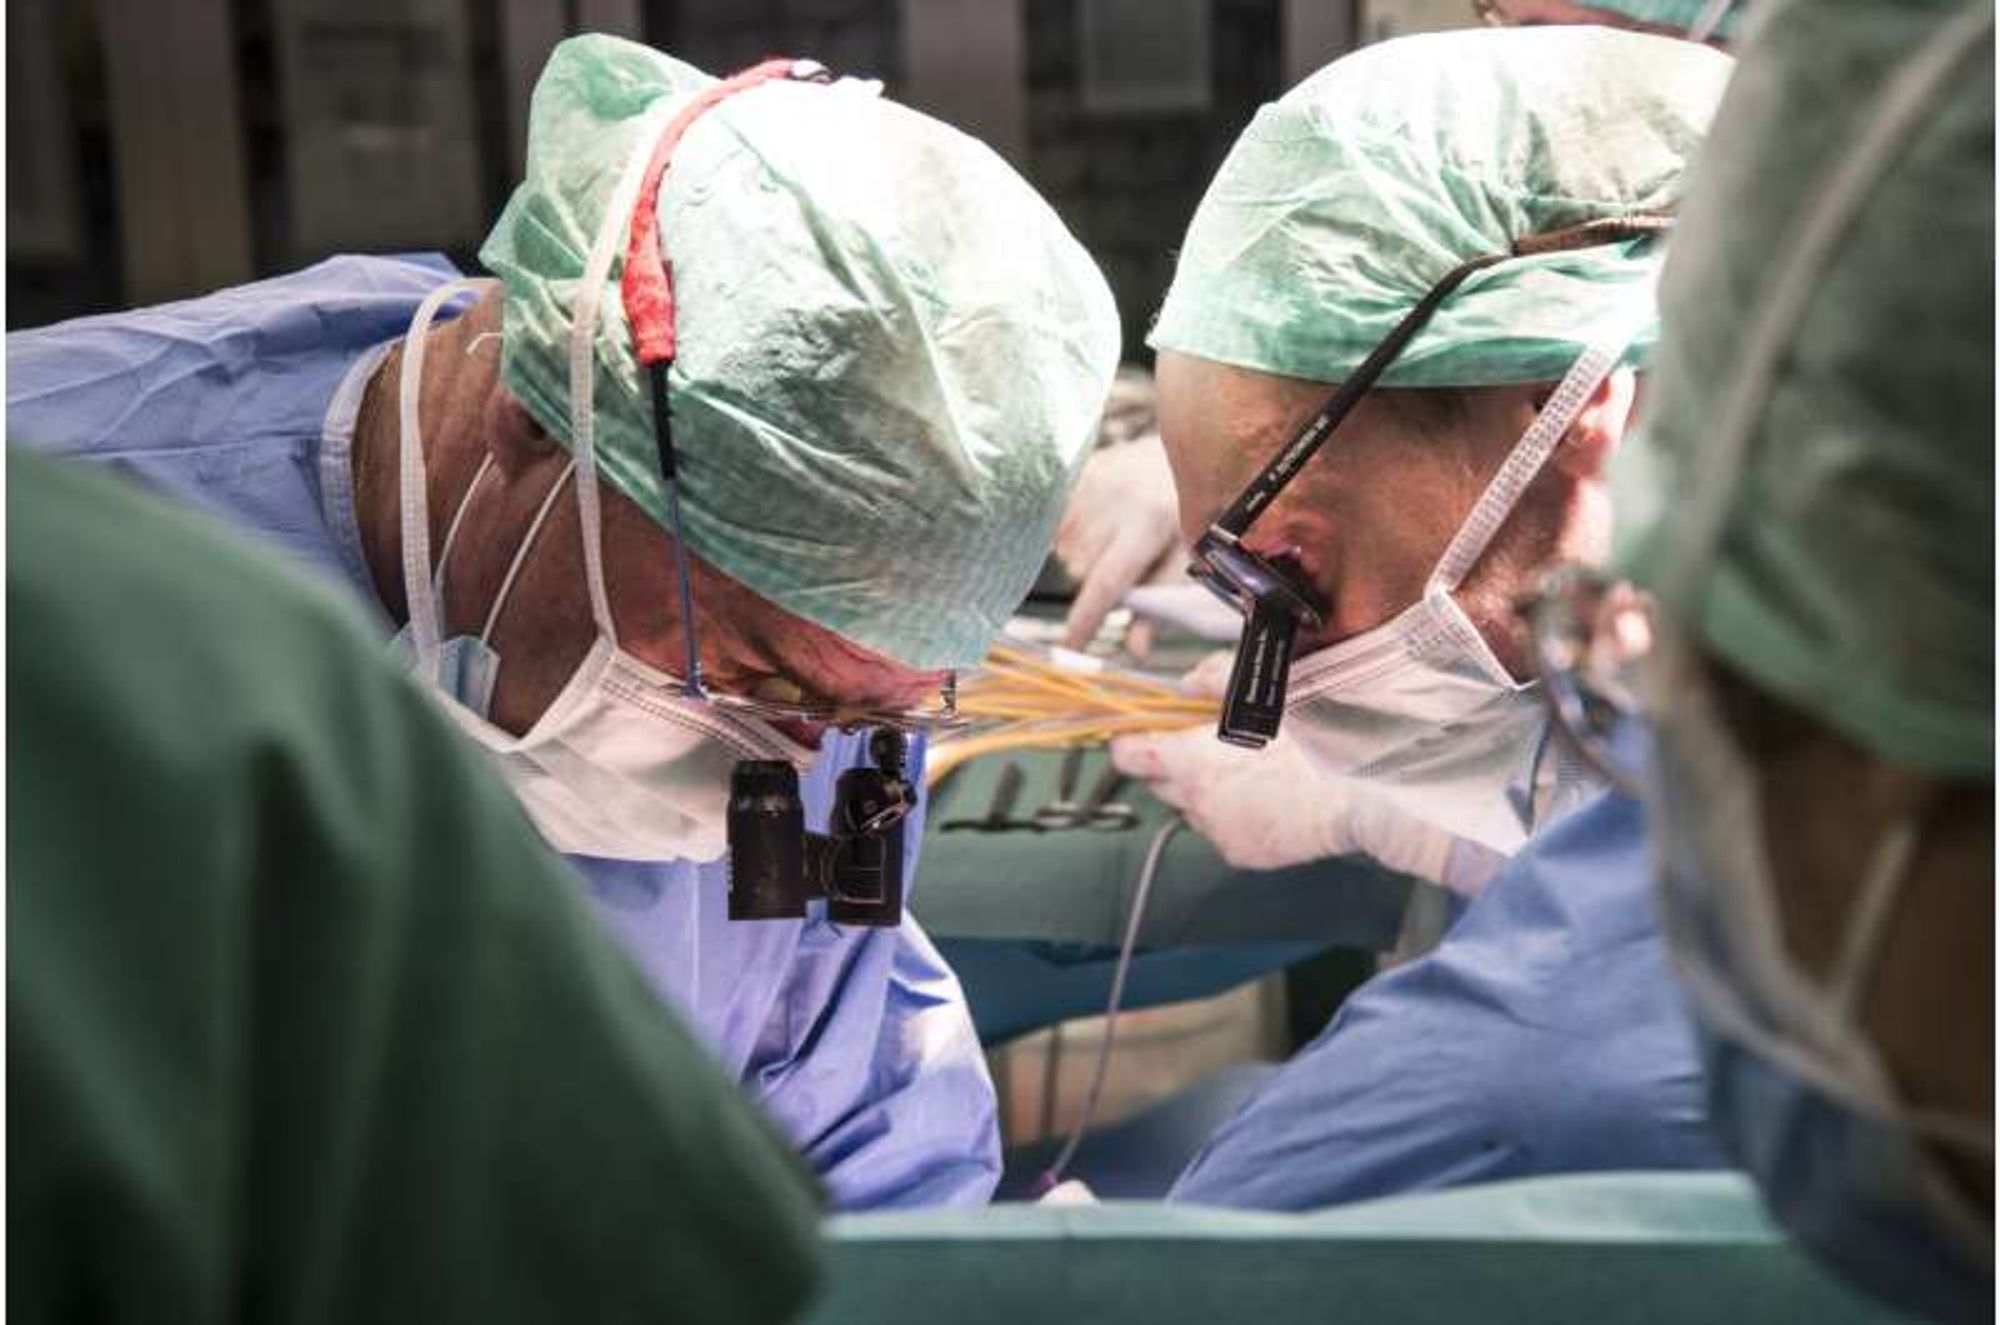 A world first: Human liver was treated in a machine and then successfully transplanted